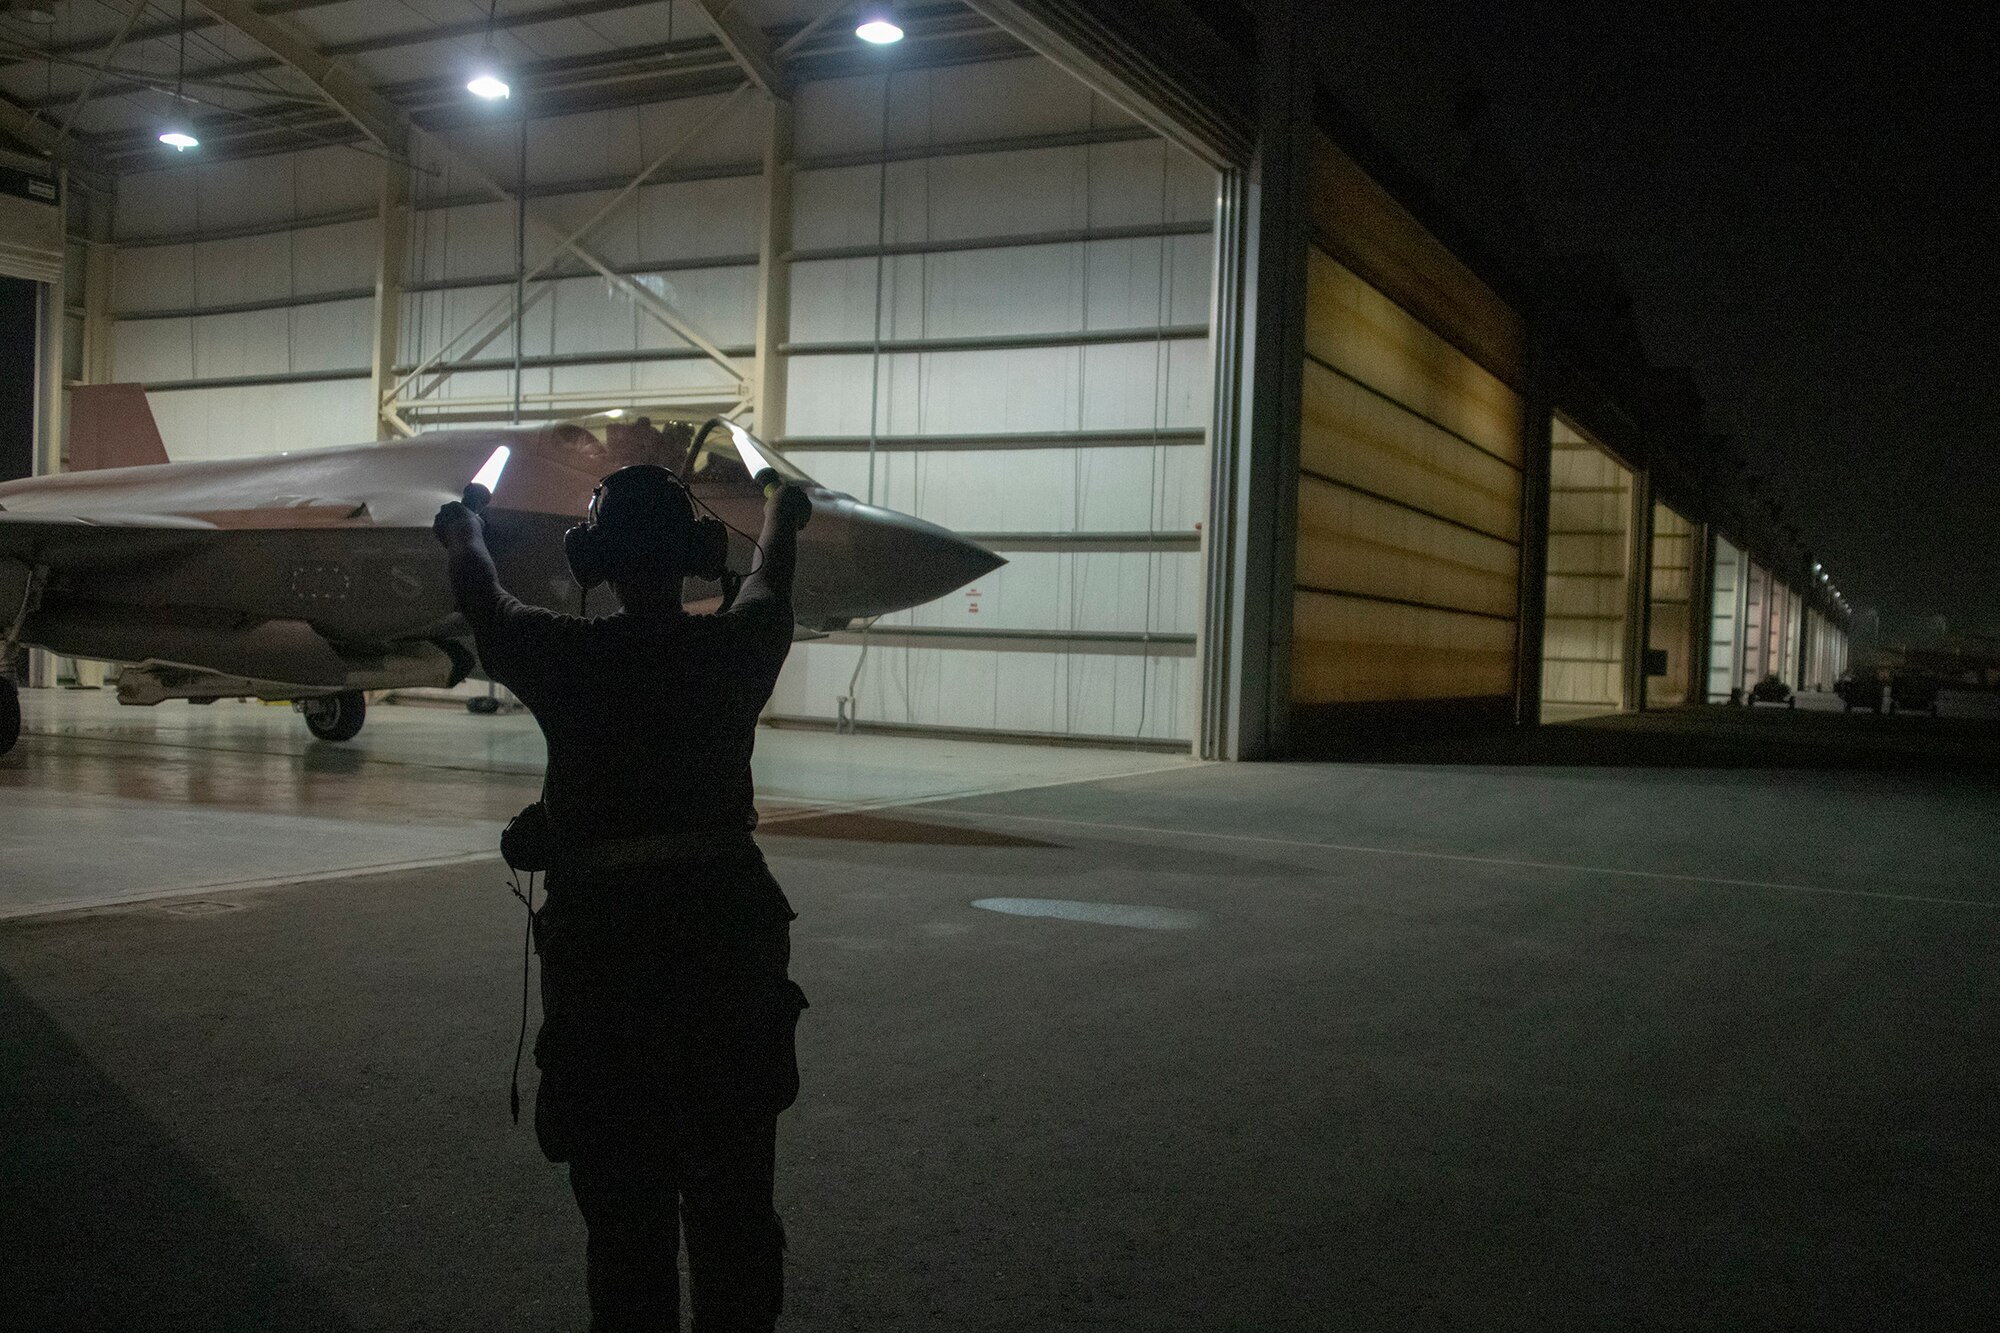 U.S. Air Force Capt. Emily Thompson, 421st Expeditionary Fighter Squadron pilot, launches an F-35A Lightning II while Airman 1st Class Ashlin Randolph, a 380th Aircraft Maintenance Squadron weapons load crew member, gives the signal to proceed on the Al Dhafra Air Base, United Arab Emirates, flightline June 5, 2020.Thompson is the first female to fly an F-35A Lightning II into combat. She was also launched by an all-female maintenance crew.  (U.S. Air Force photo by Tech. Sgt. Kat Justen)